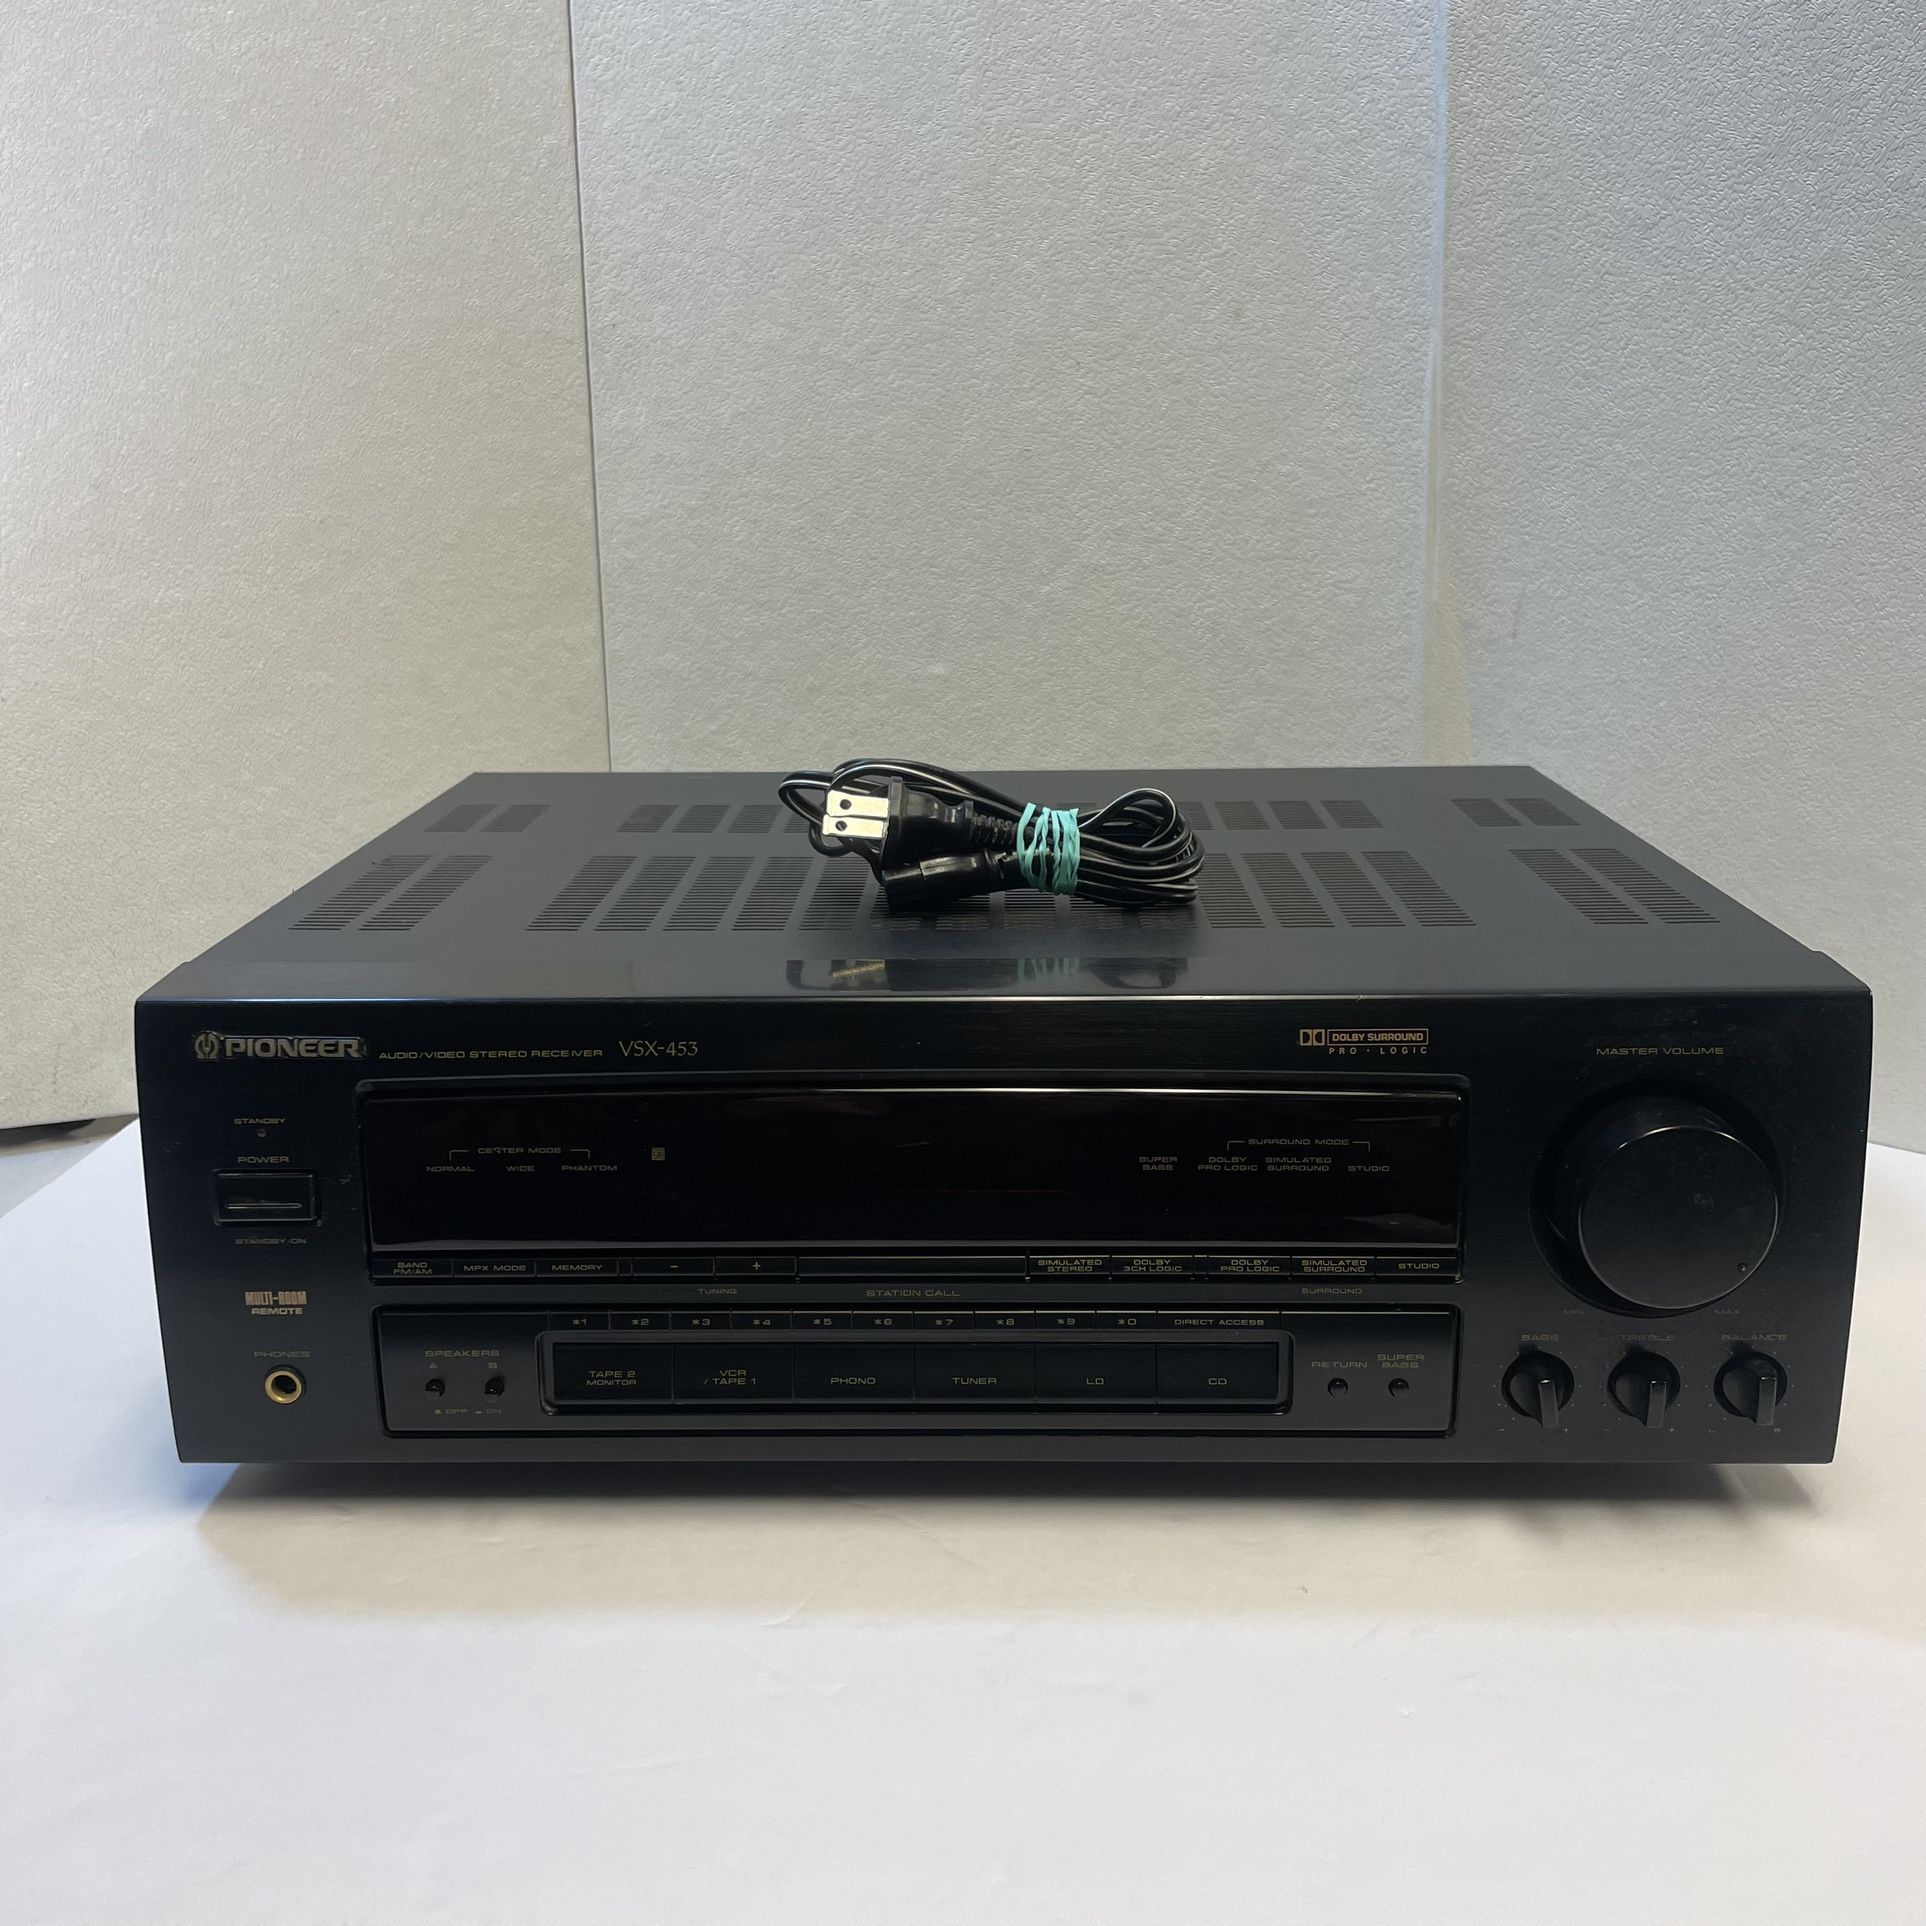 Pioneer VSX-453 Receiver HiFi Stereo 5.1 Channel Home Audio No Remote Tested